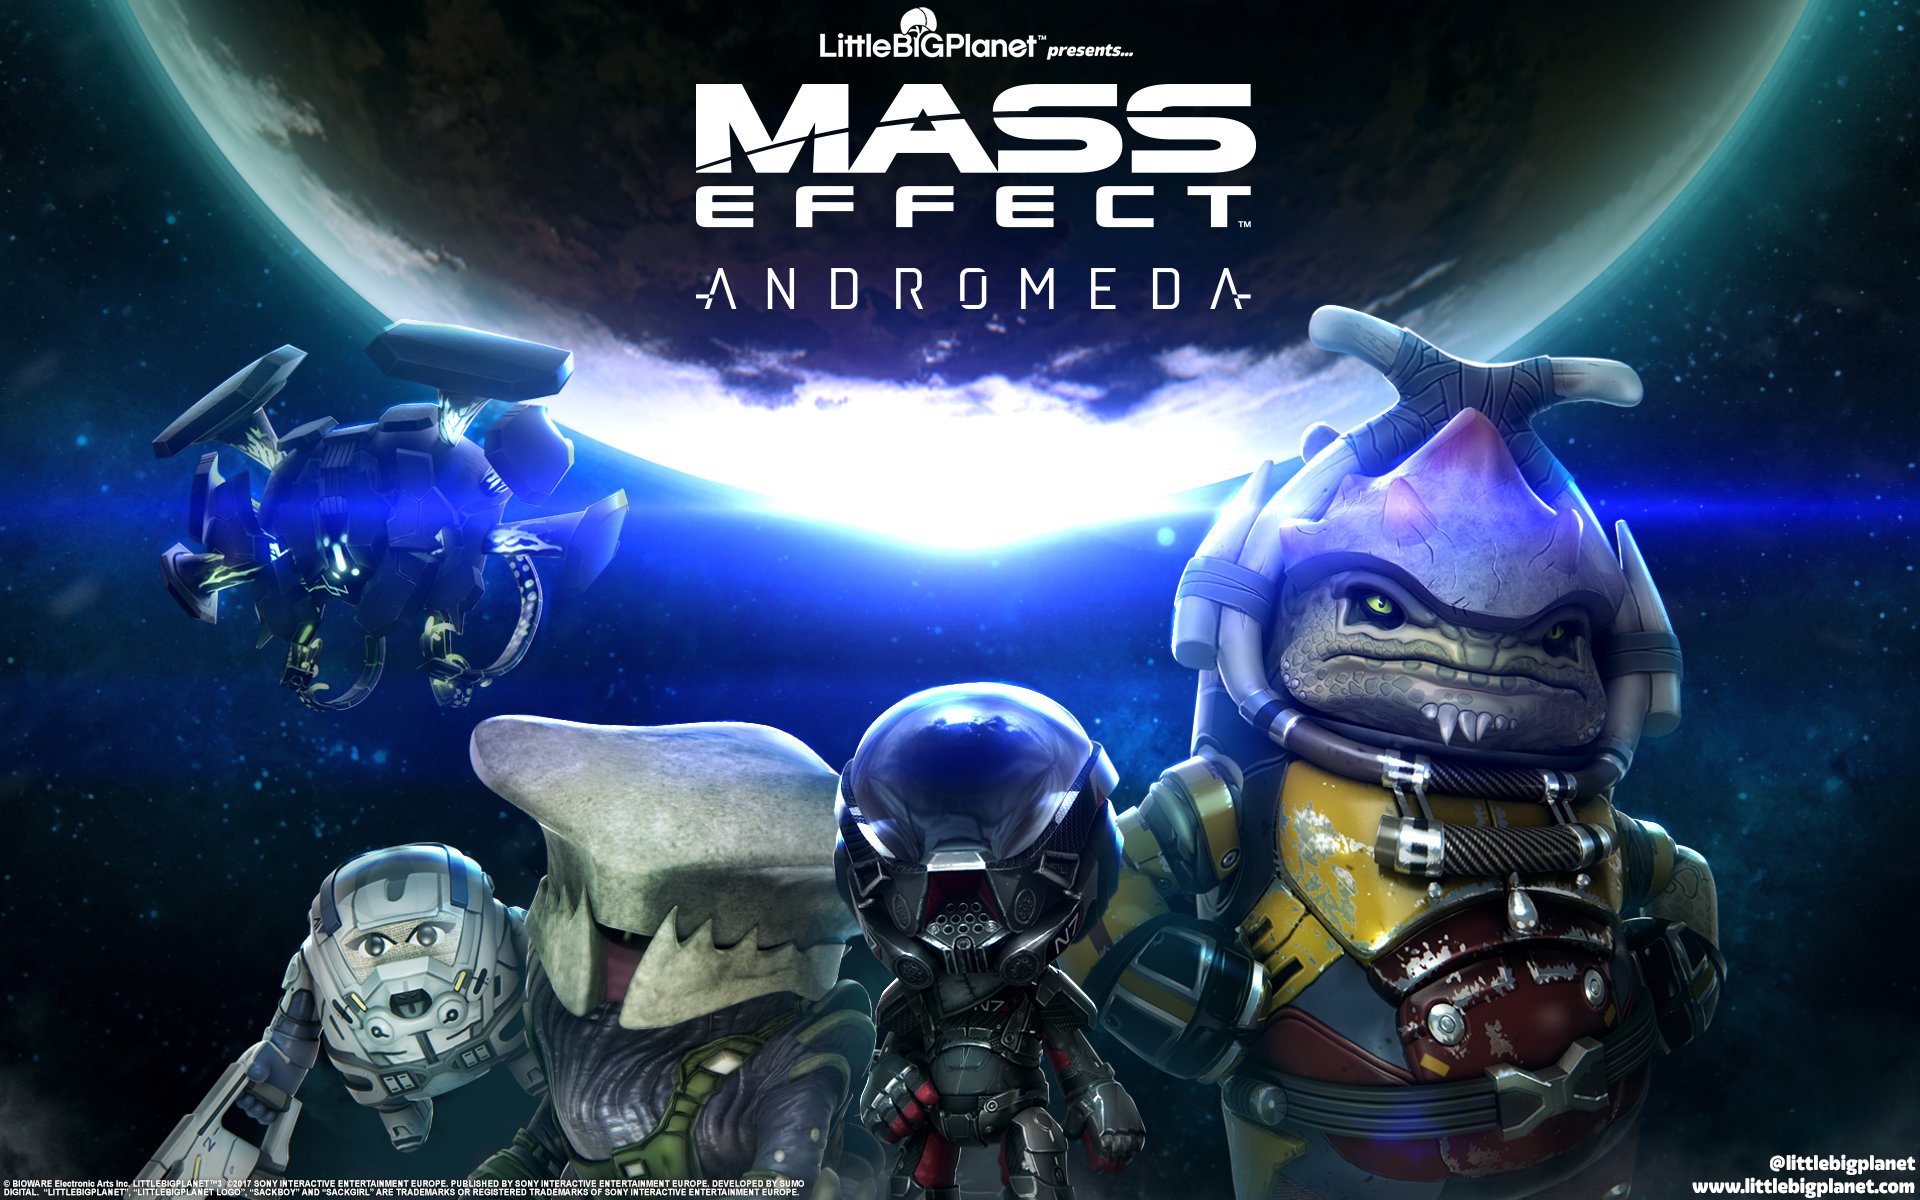 Sackboy: A Big Adventure | LittleBigPlanet on Twitter: "The @masseffect: Andromeda Costume is available to download for now! Download Now: https://t.co/TX14JriL4j" / Twitter